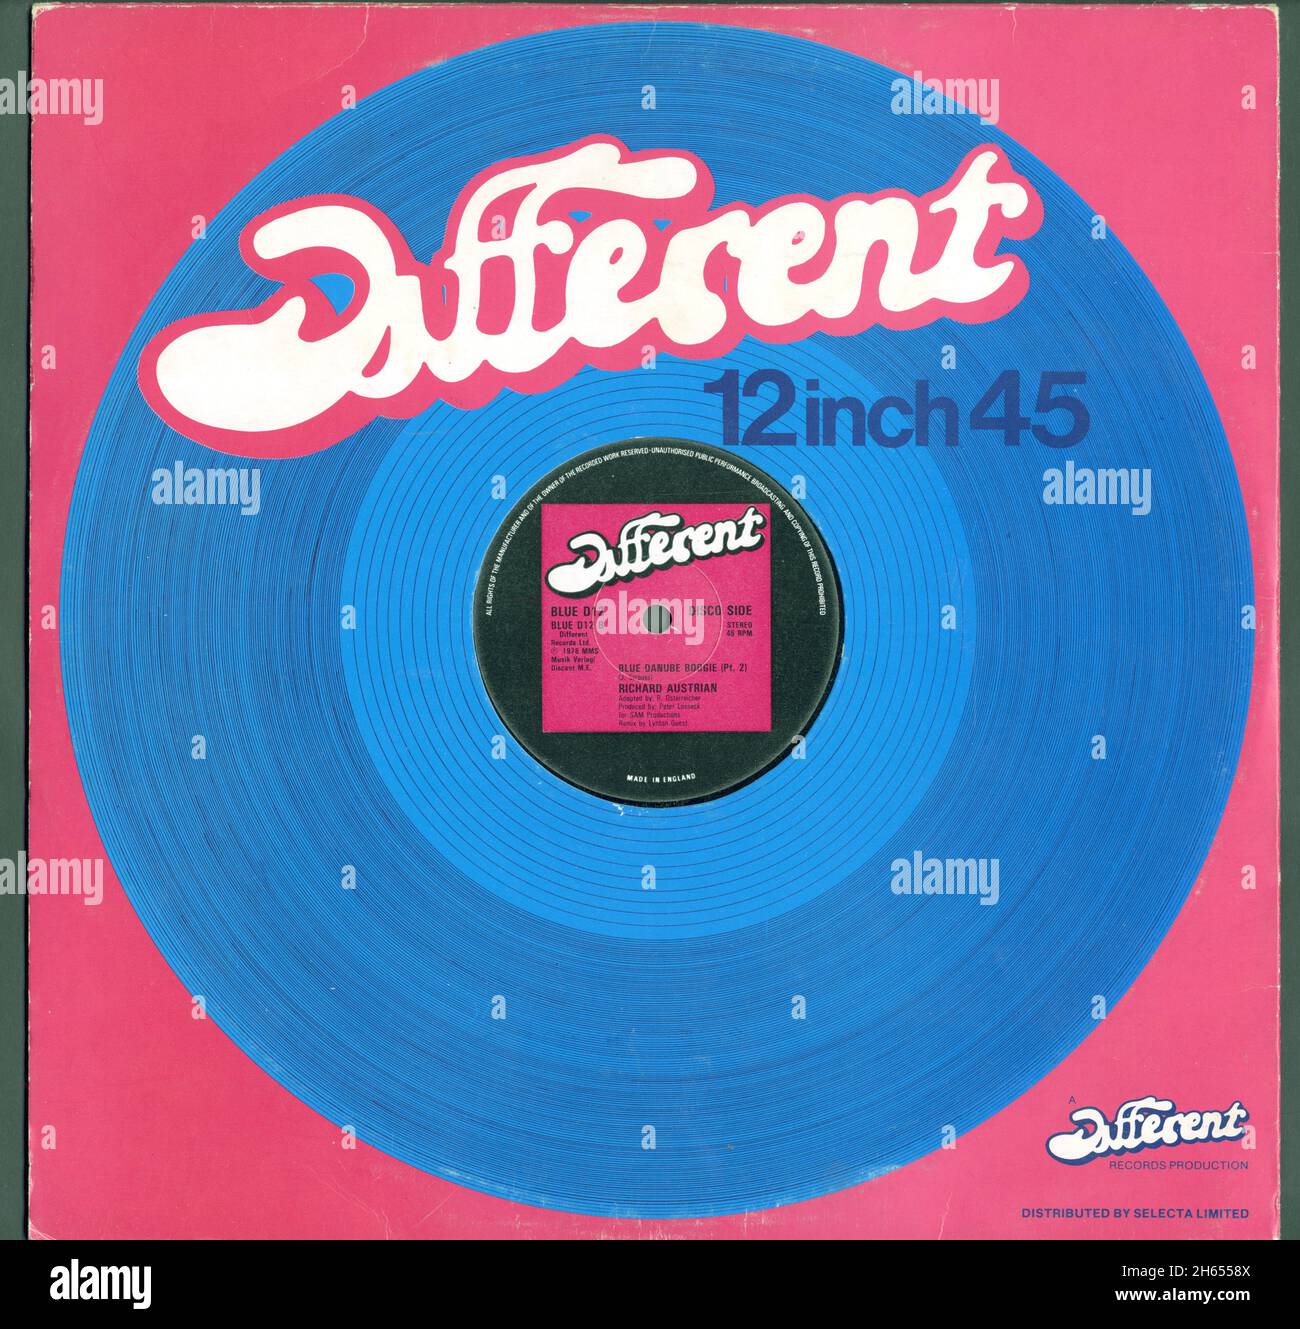 Different Records was a short lived indie British reggae label operating  during 1978 and 1979, based in London but cutting many of their records in  Jamaica. This is their generic 12" sleeve